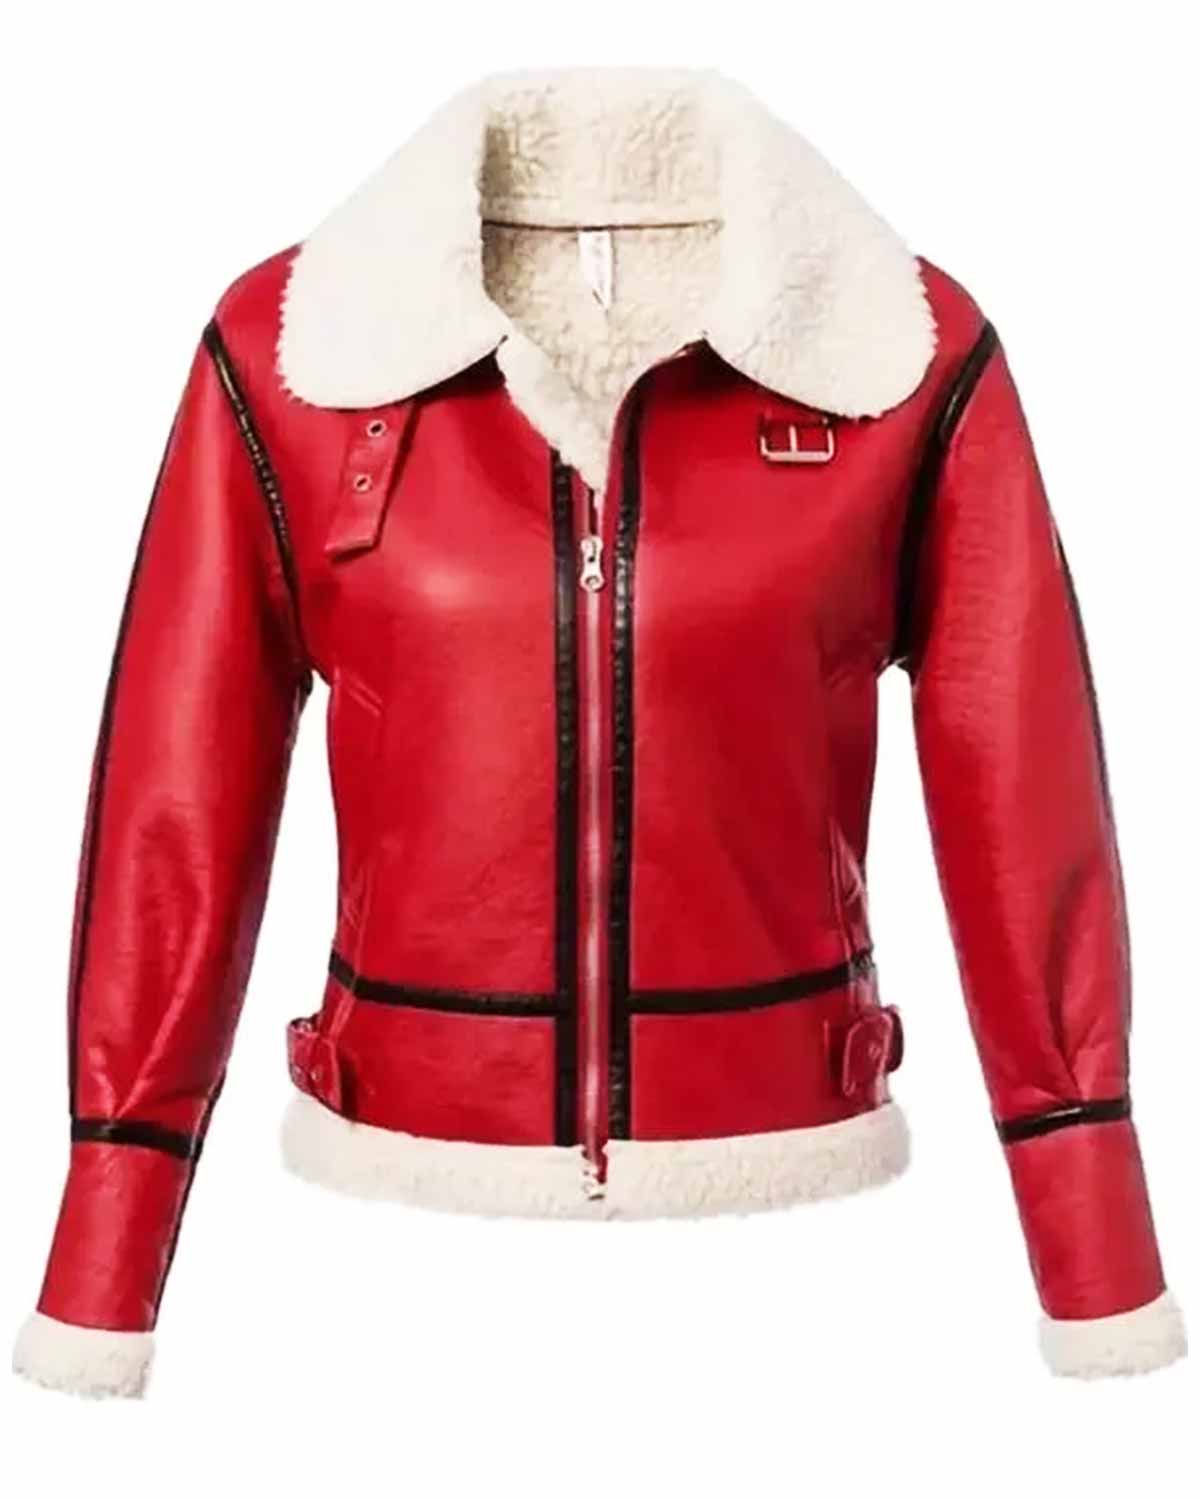 Elite Christmas Womens Red Leather Jacket